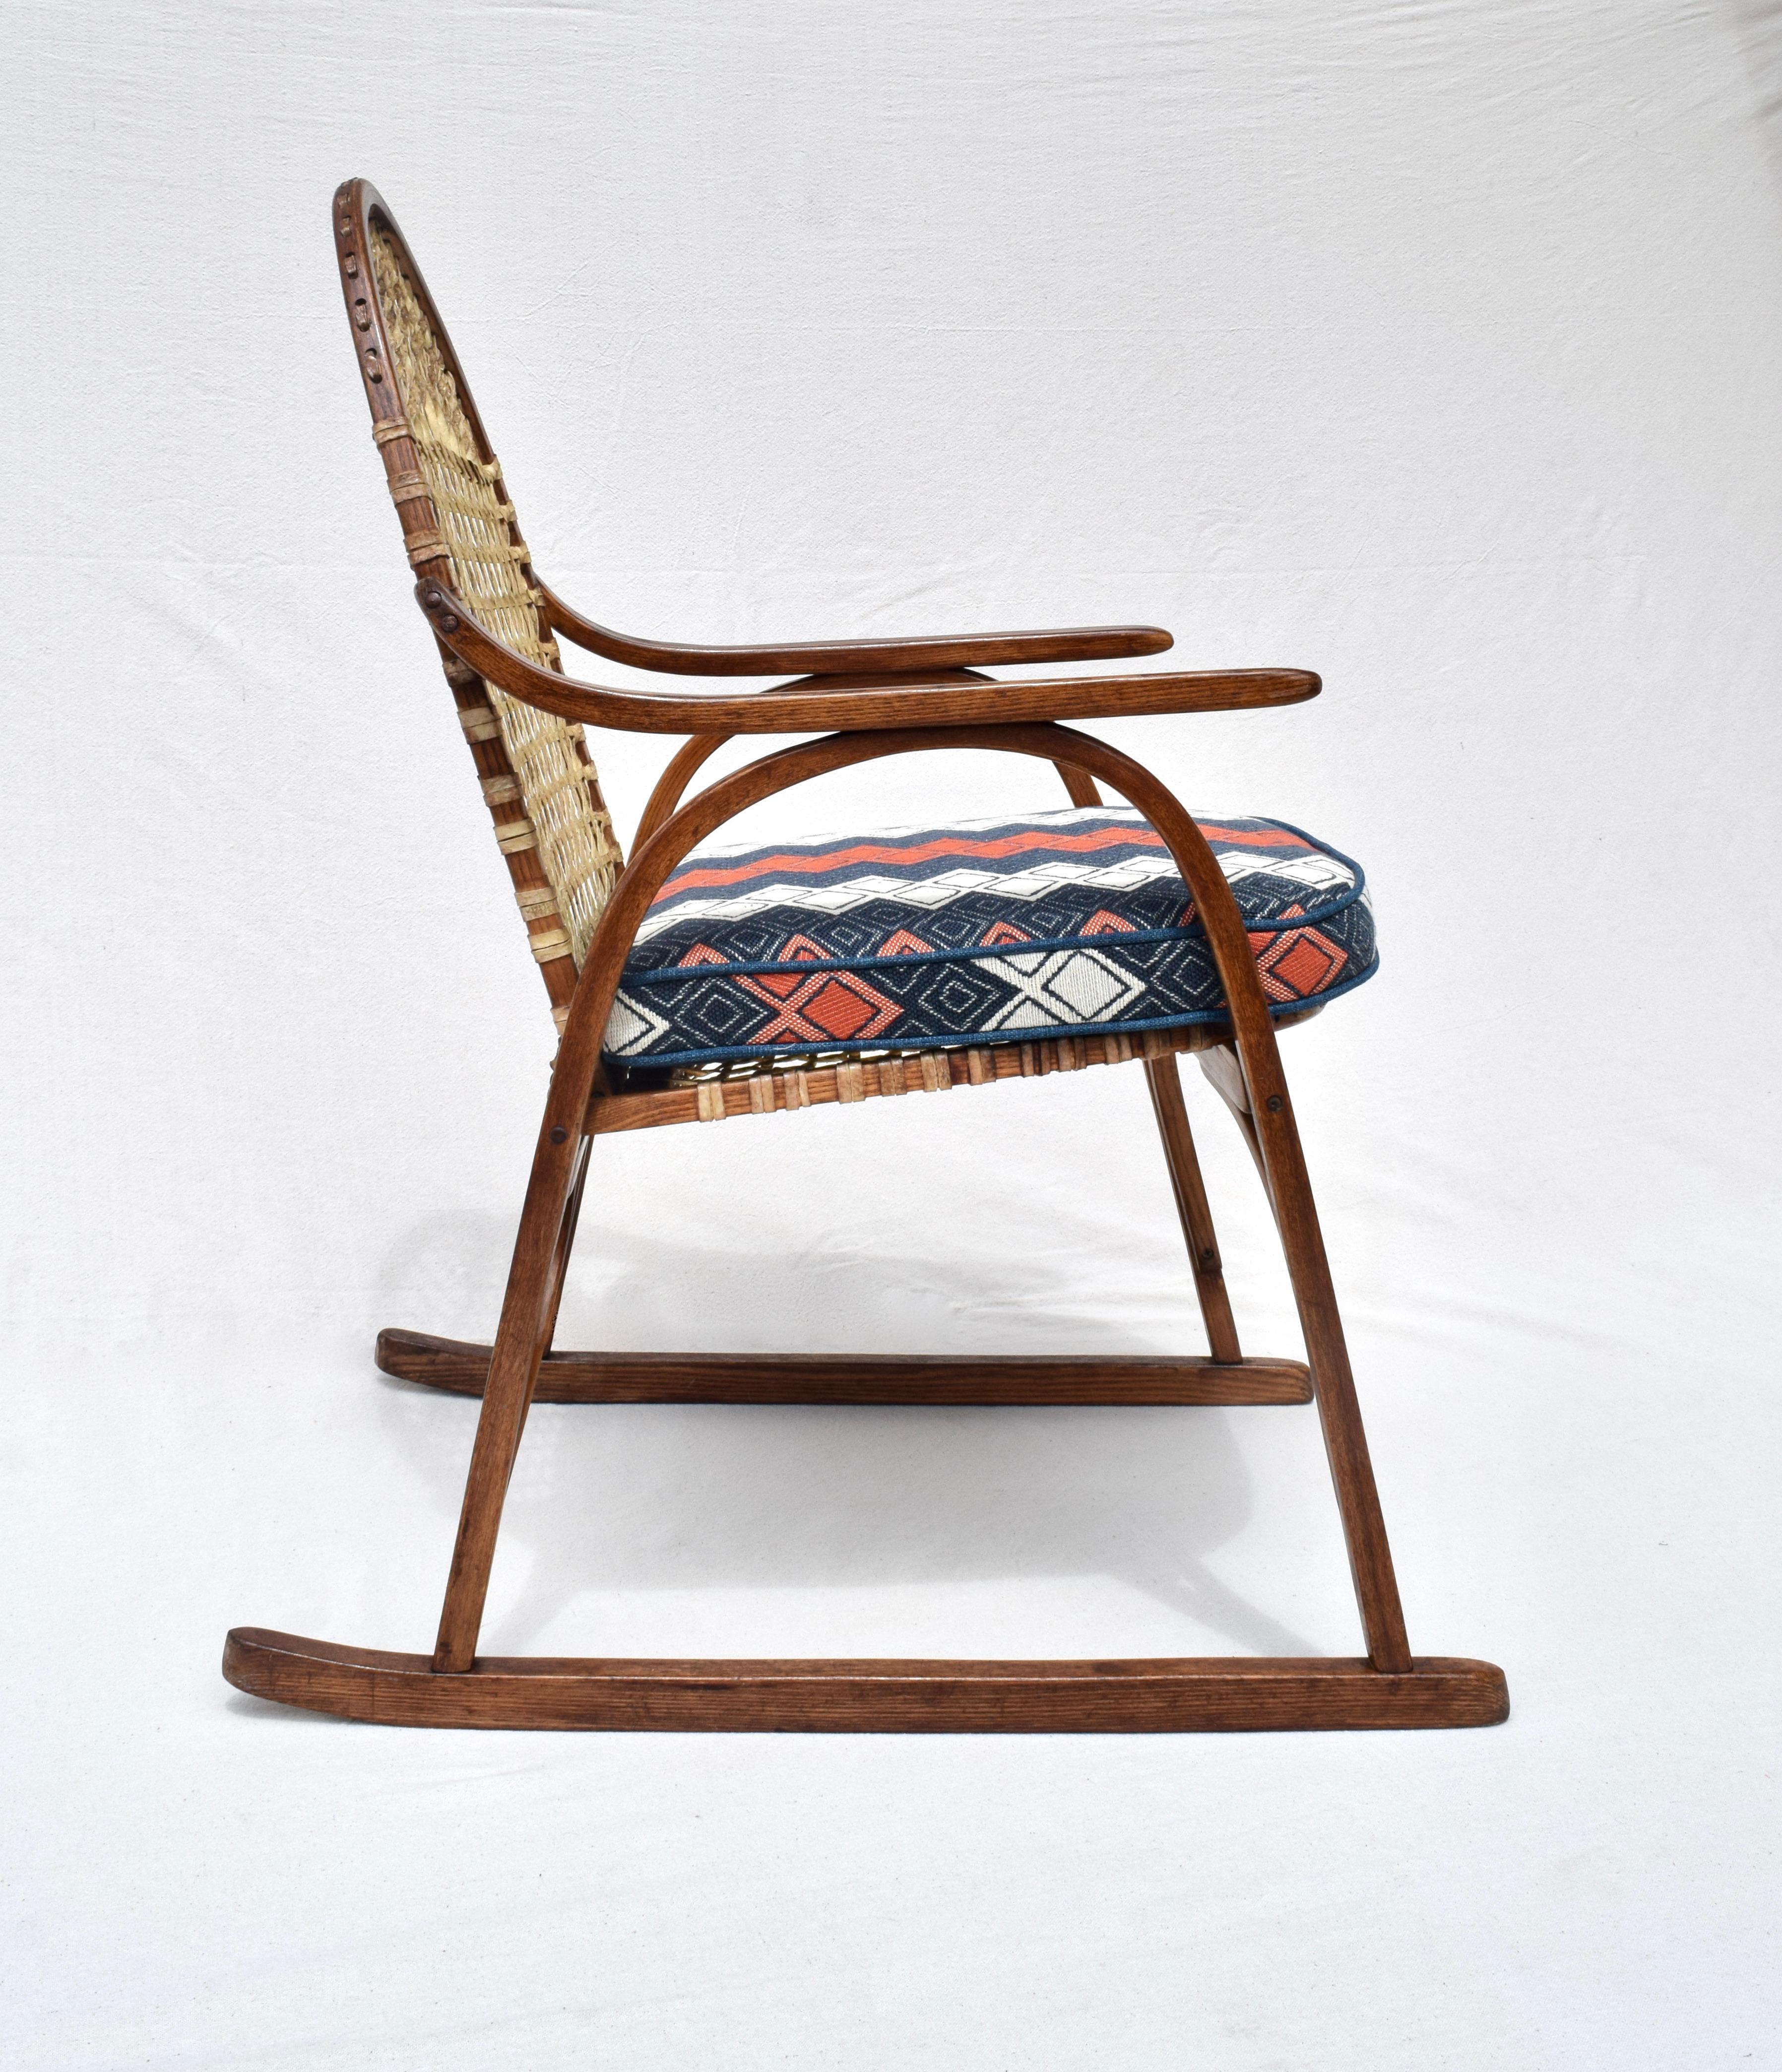 Upholstery Vermont Tubbs Snow Shoe Chair